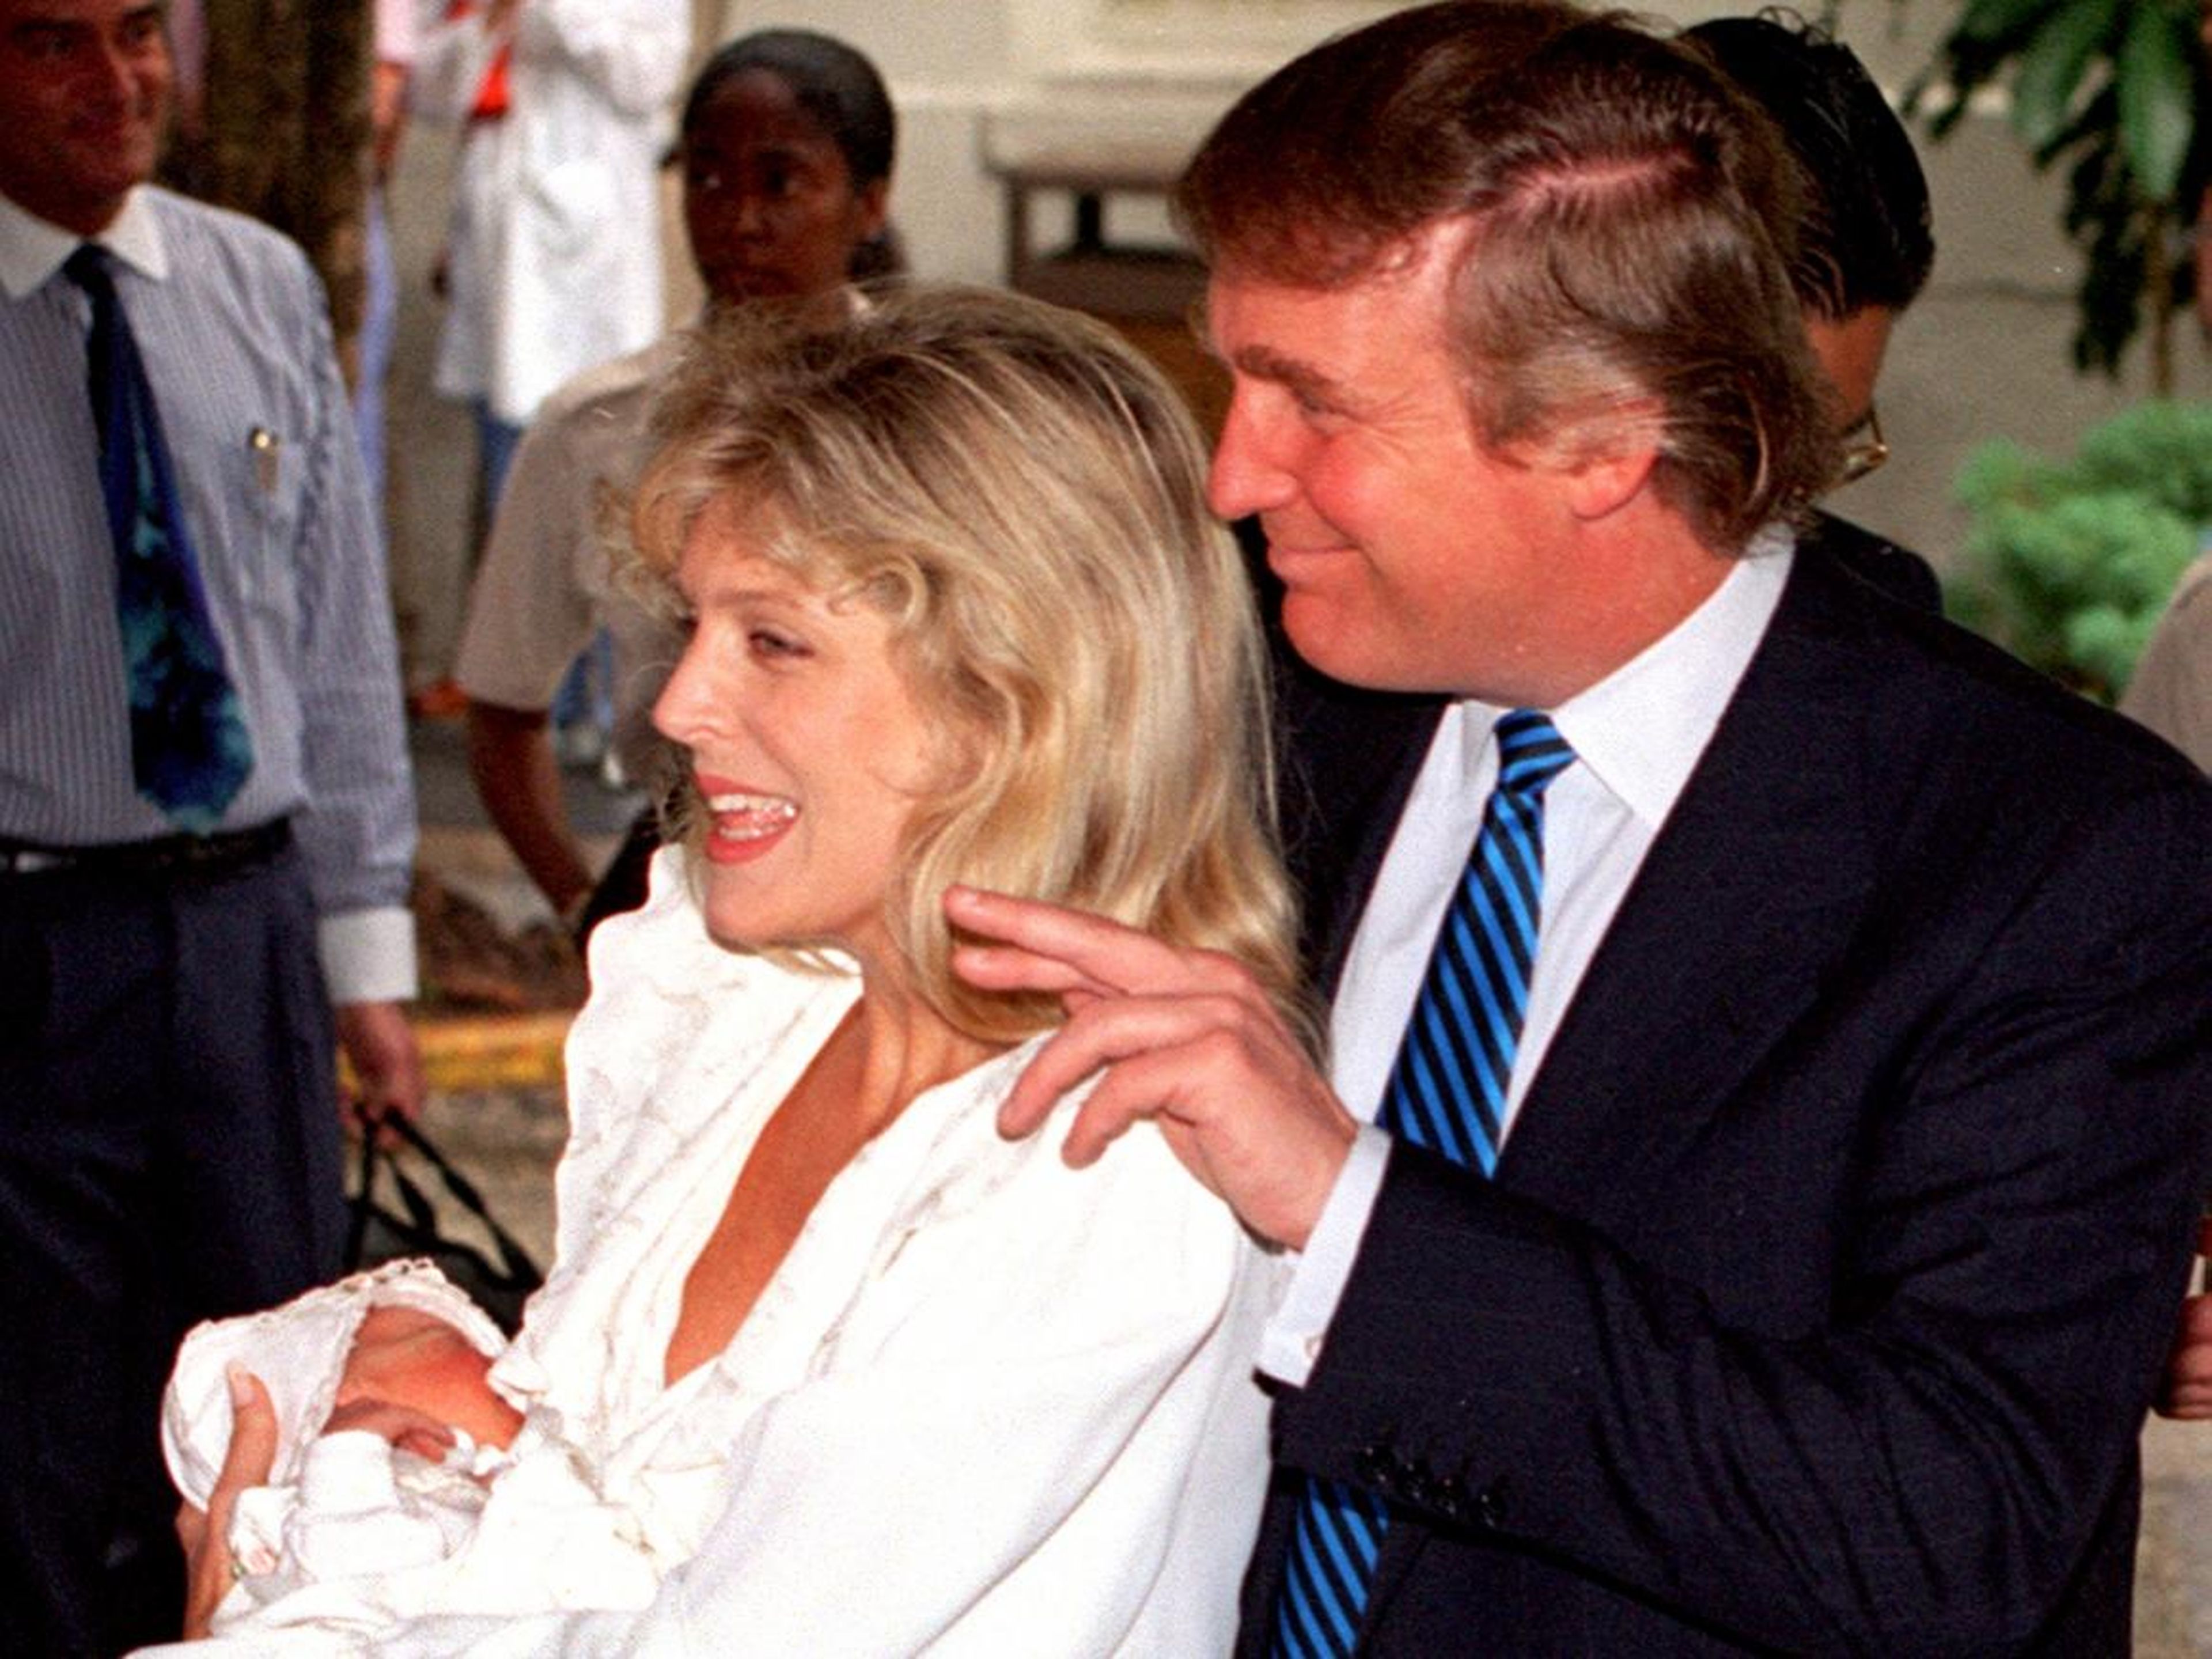 Trump then married actress Marla Maples, who was at the center of the drama in his first divorce, in 1993, just after the birth of their daughter Tiffany.